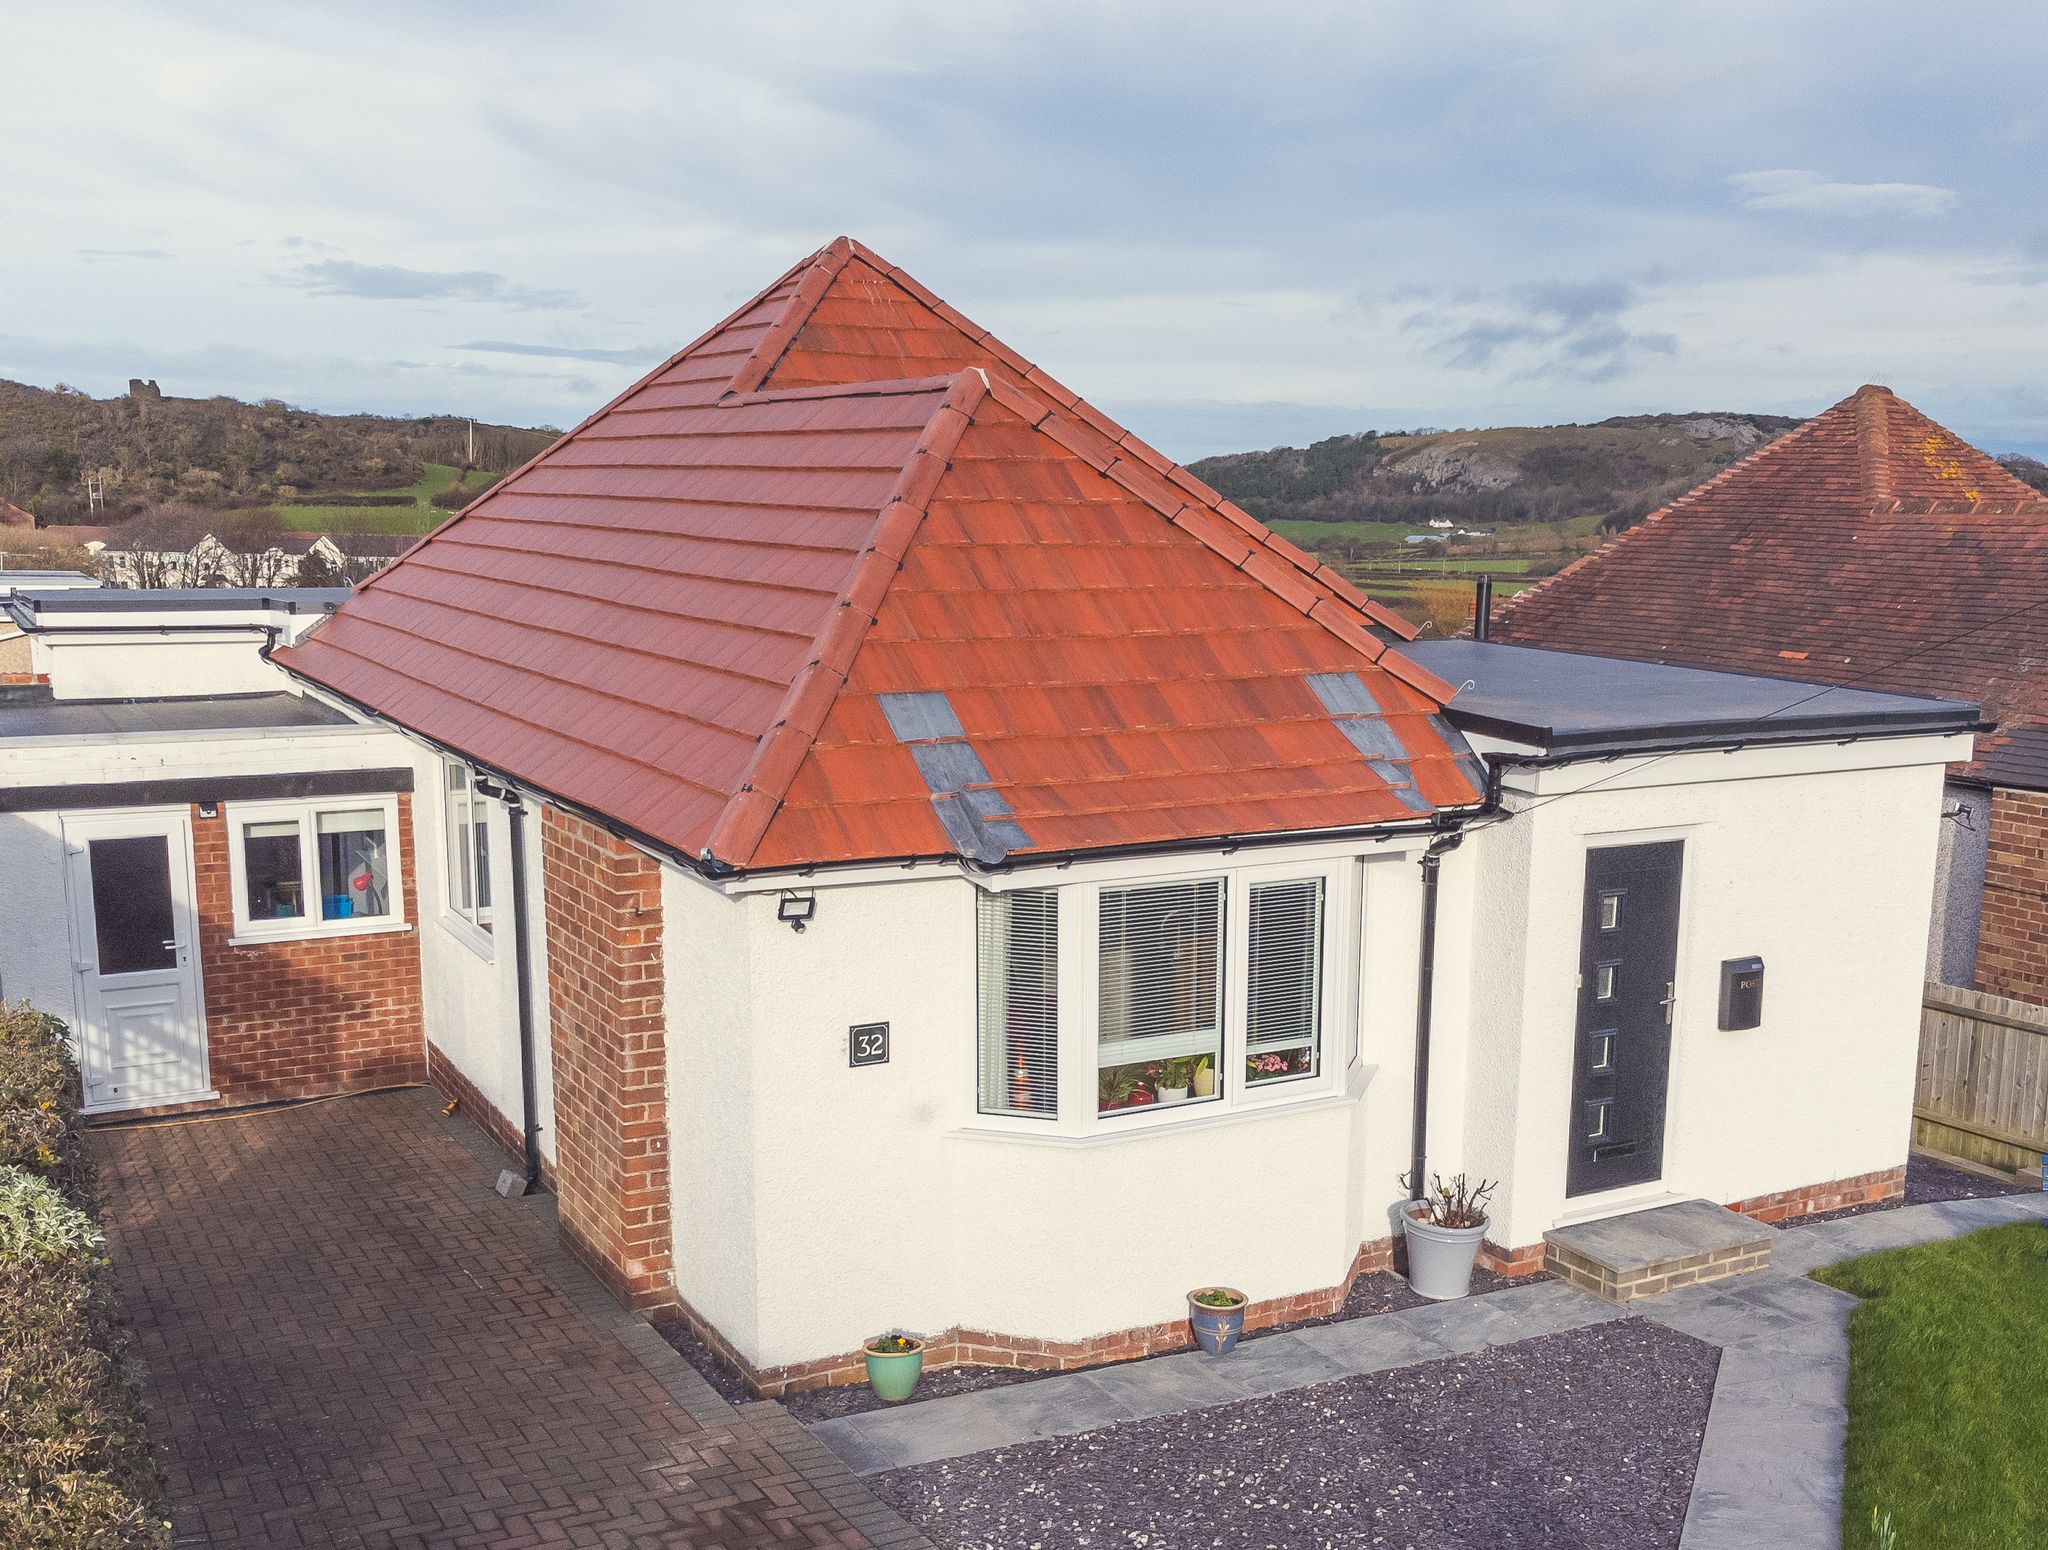 Tile Roof Contractors Minffordd, LL57 - DD Roofing